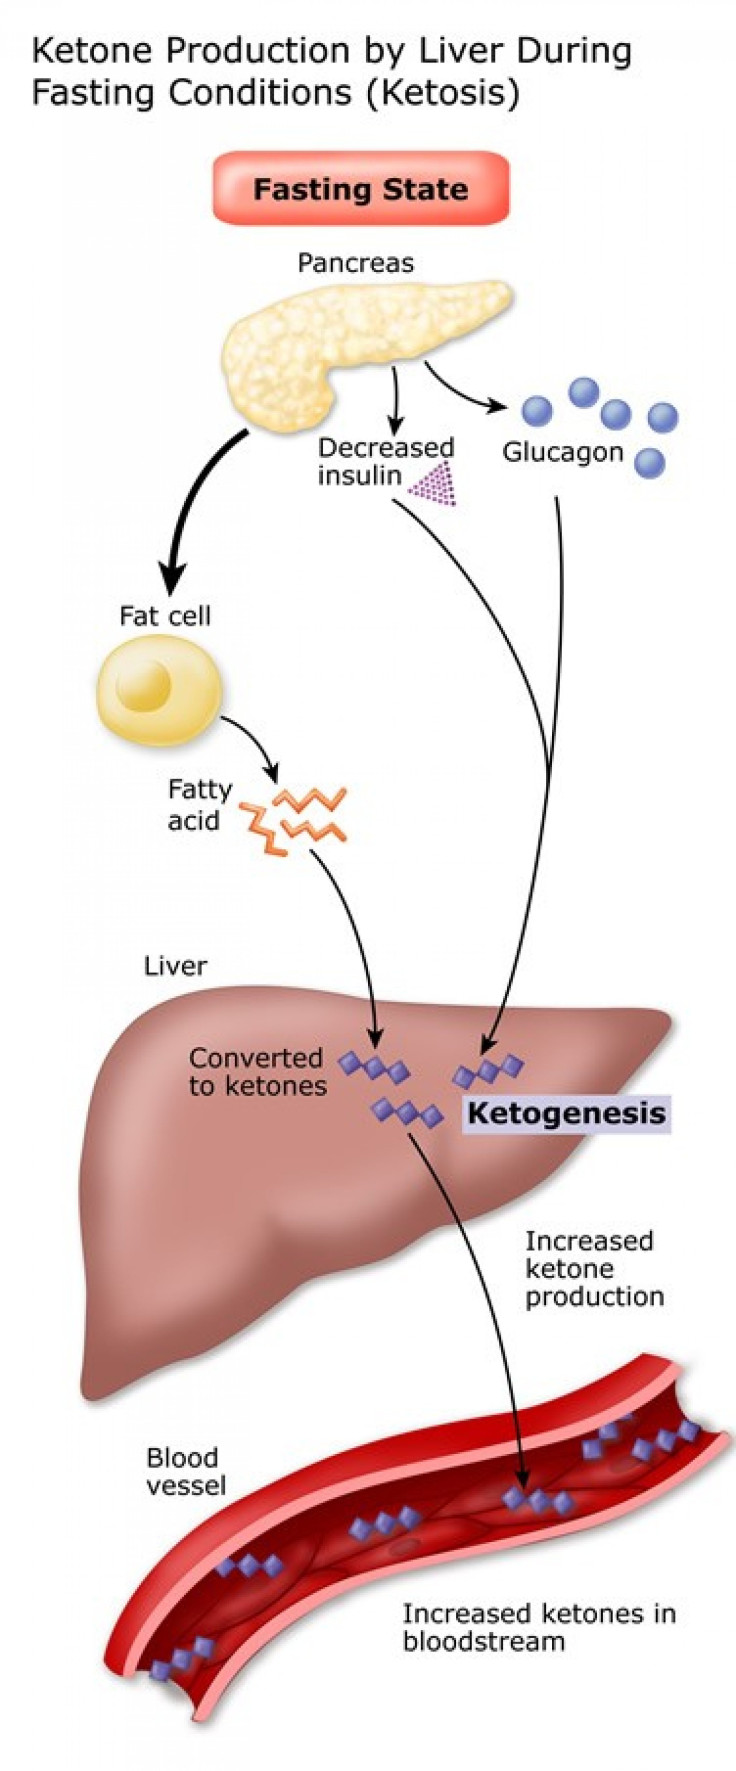 What are Ketones and How do They Work in the Body?